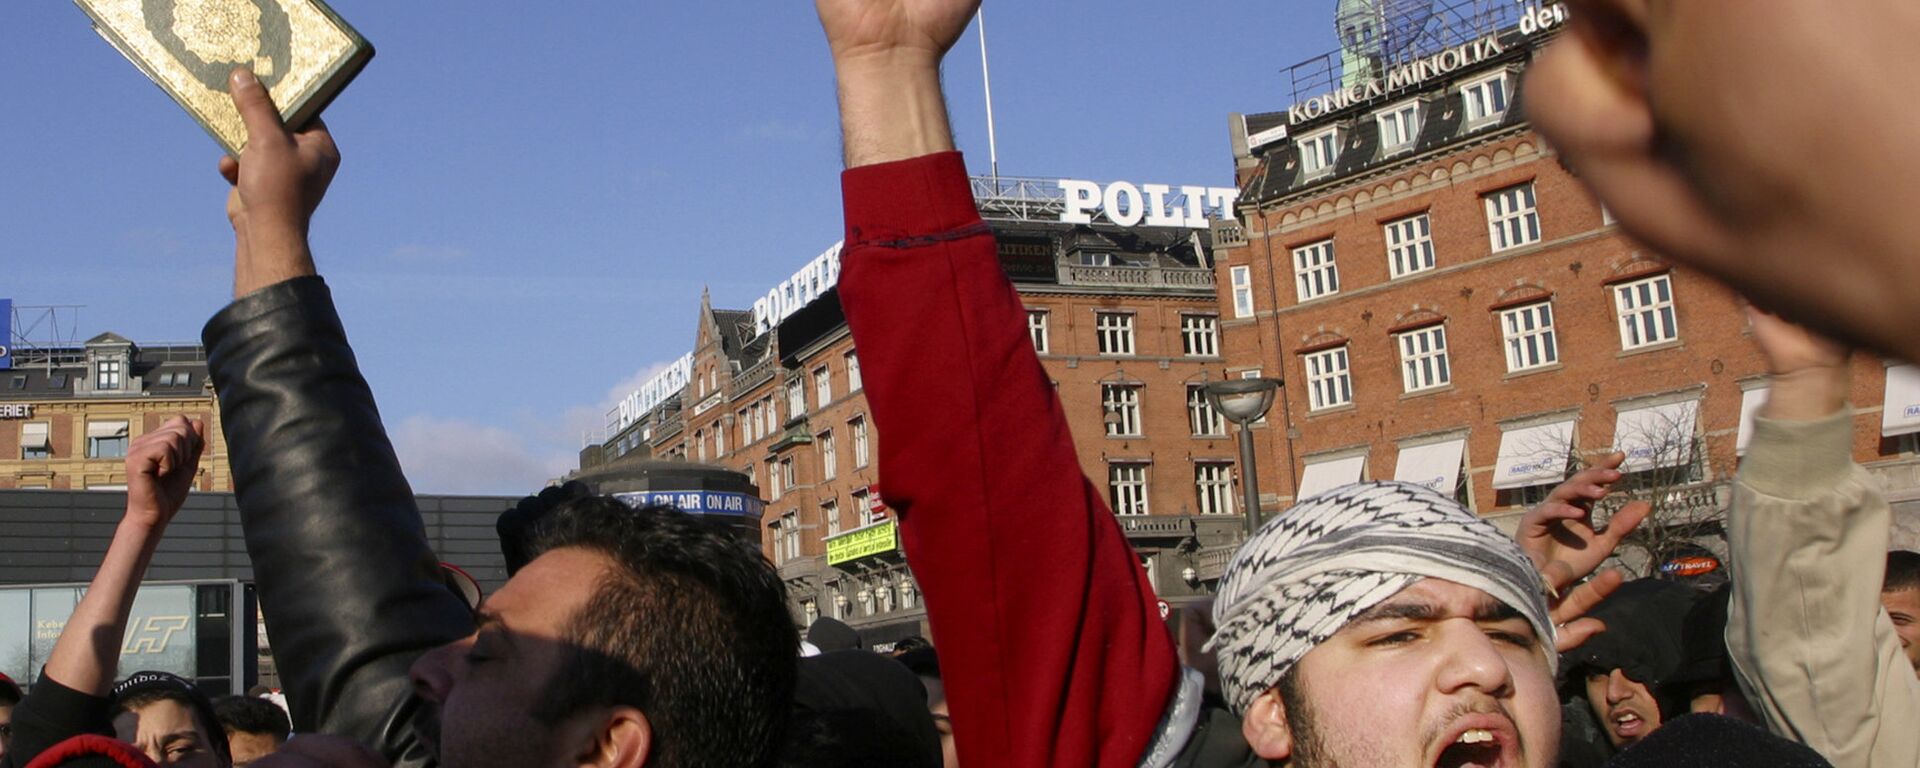  Muslims gesture as one holds a Quran, during a protest against the publication by a Danish newspaper Jyllands-Posten of caricatures of the Prophet Muhammad, outside the City Hall, in Copenhagen, Denmark (File) - Sputnik International, 1920, 18.06.2021